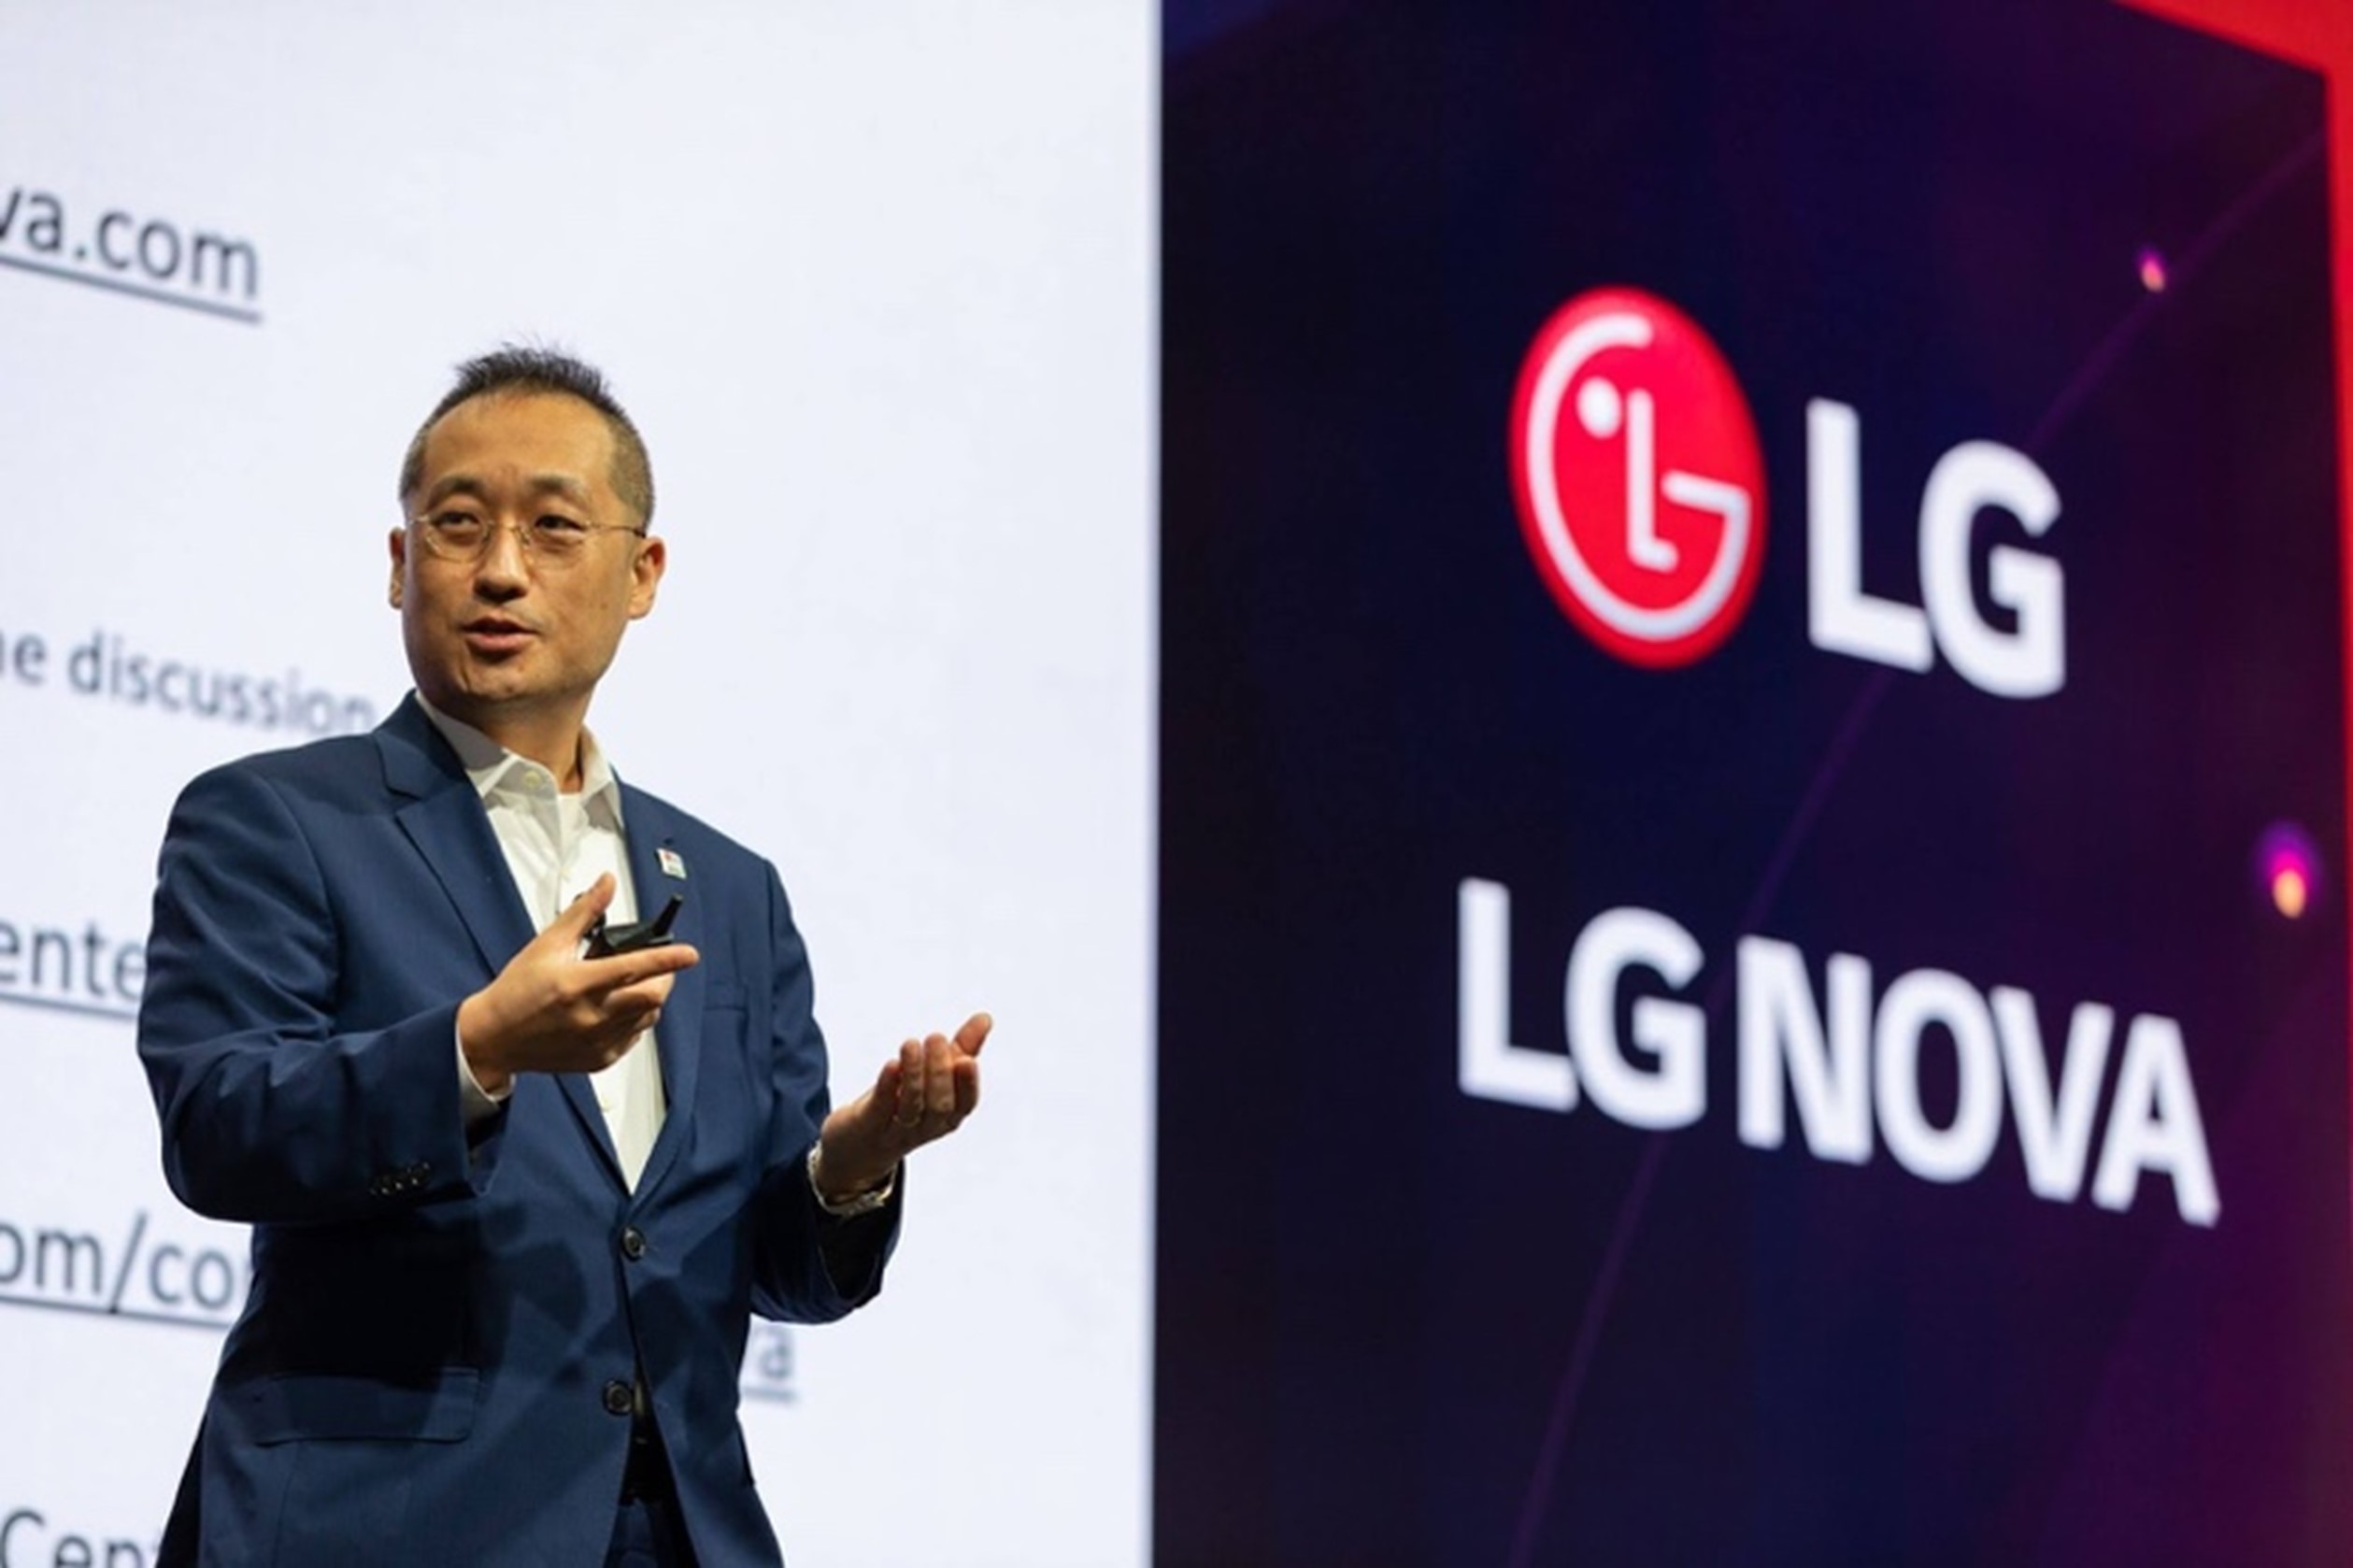 Dr. Sok-woo Rhee, Head of LG NOVA (North America Innovation Center), giving a speech on stage at the Mission Launch Live event